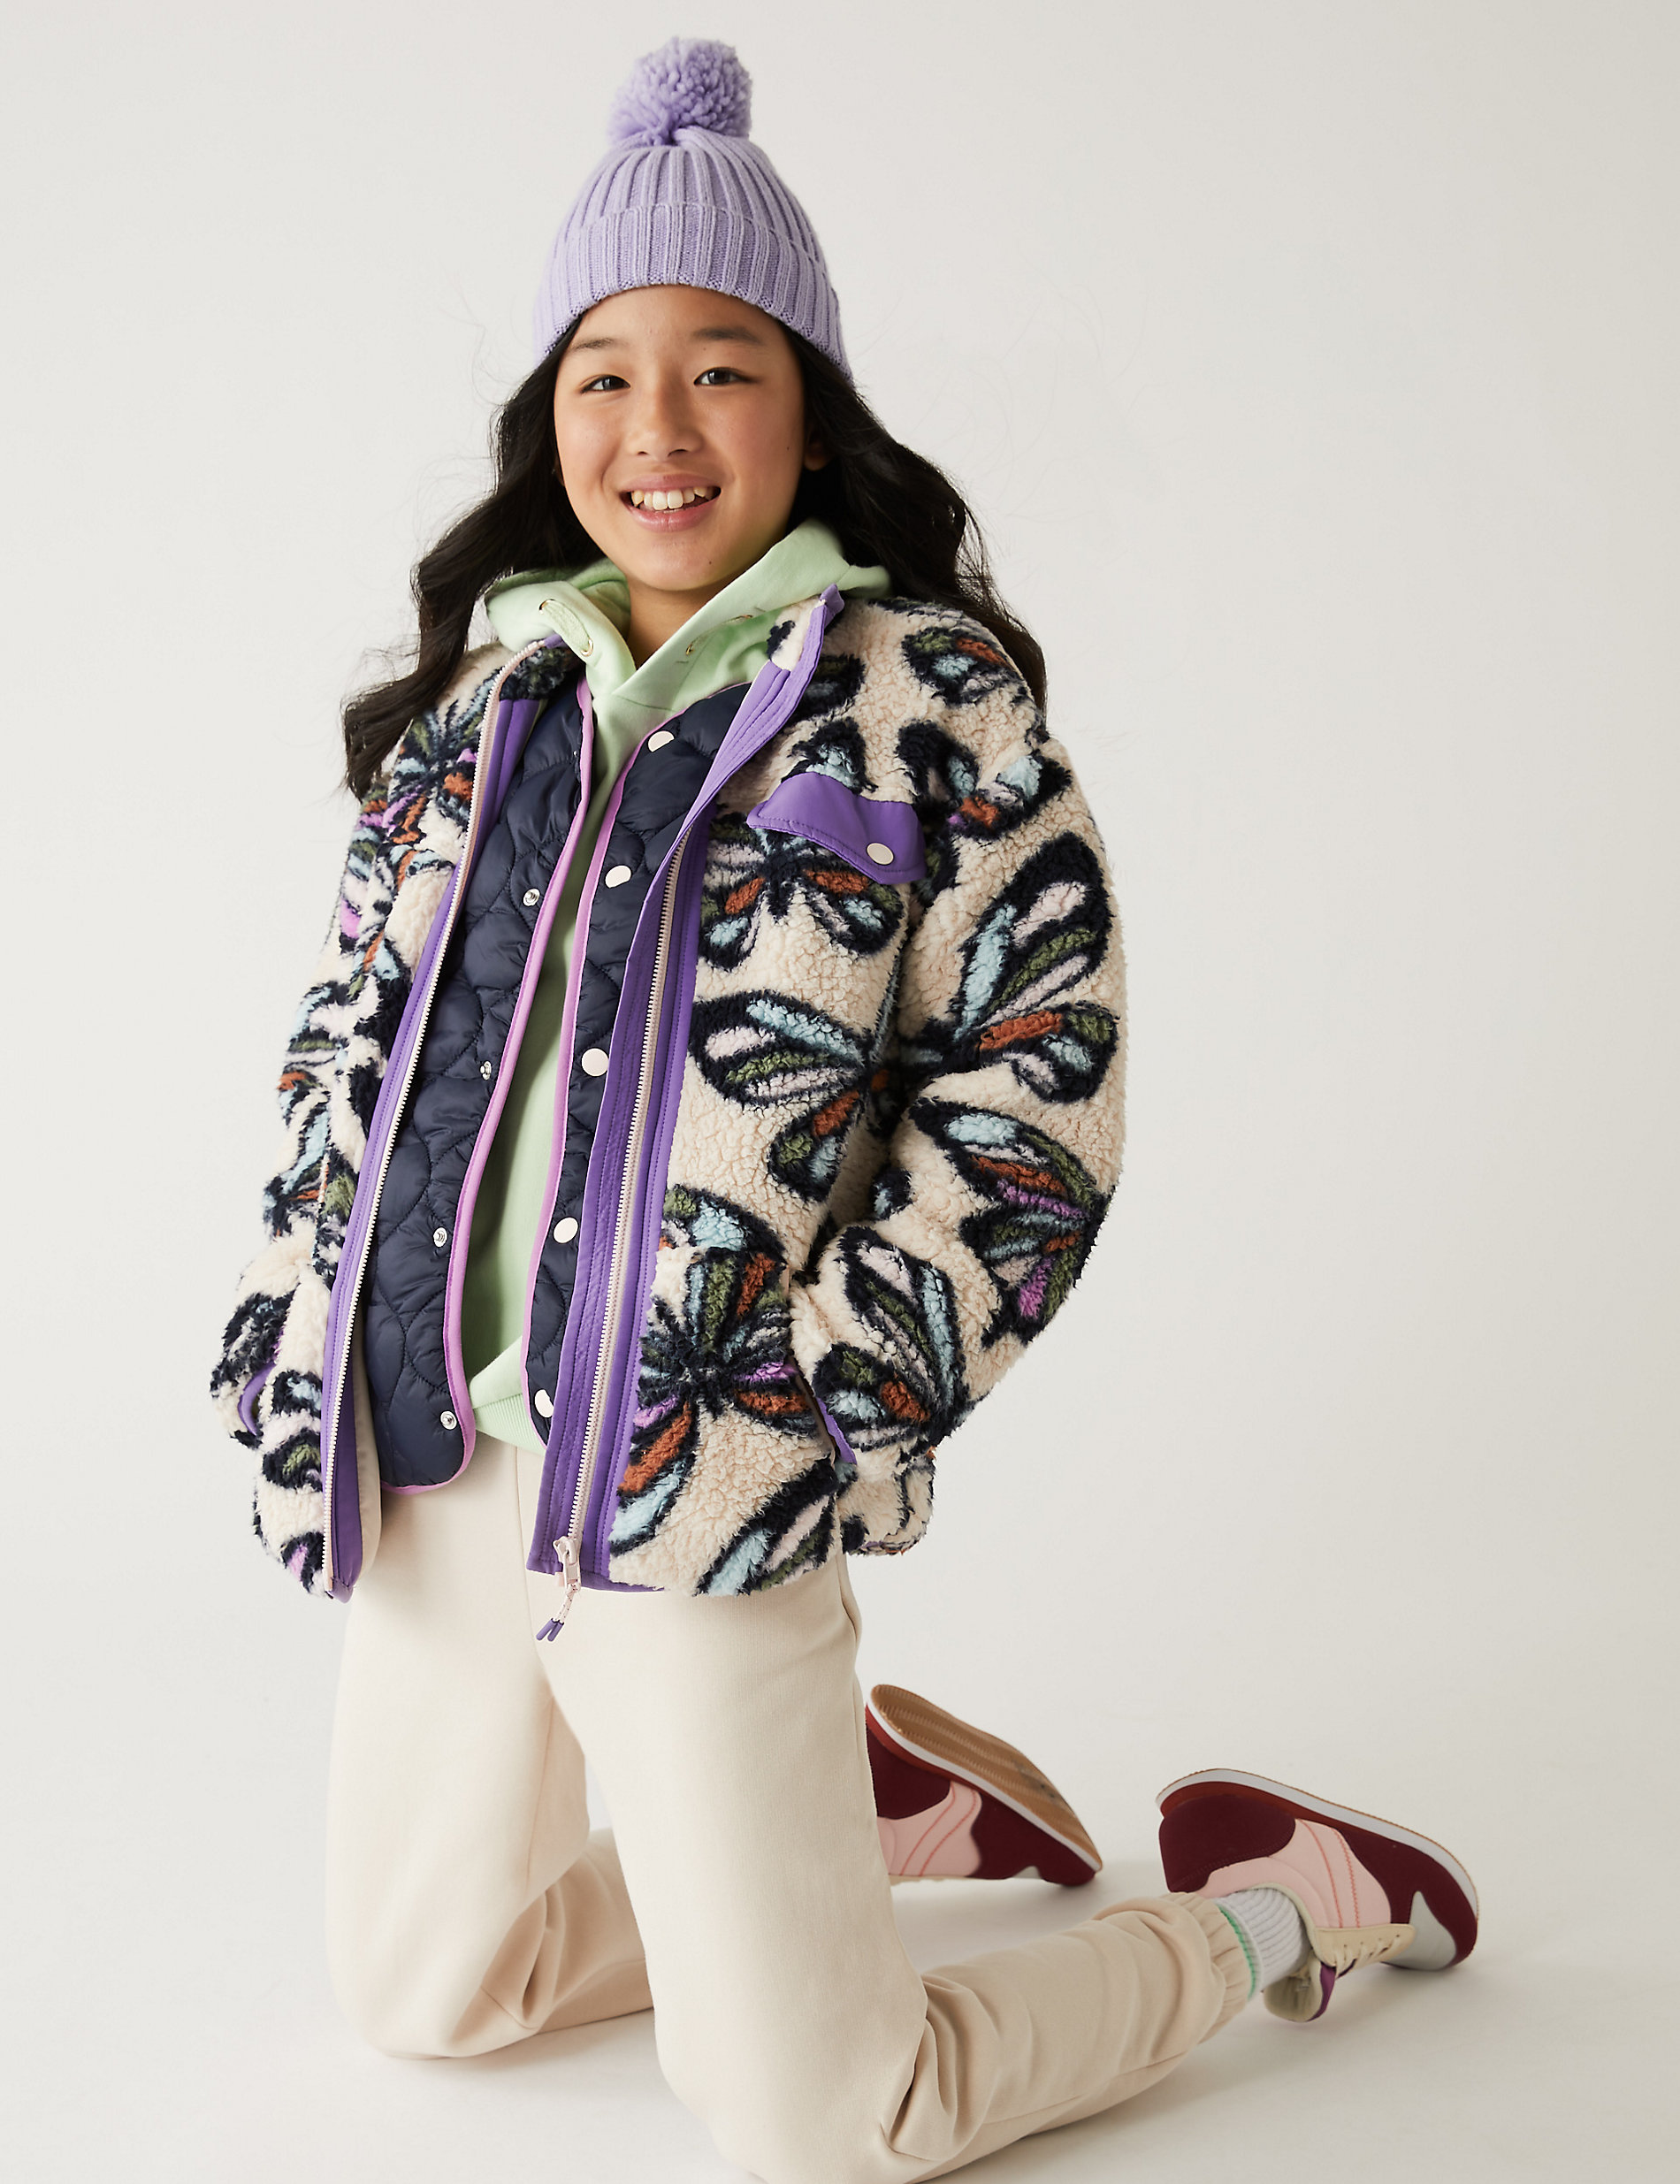 Borg Butterfly Jacket (6-16 Yrs)